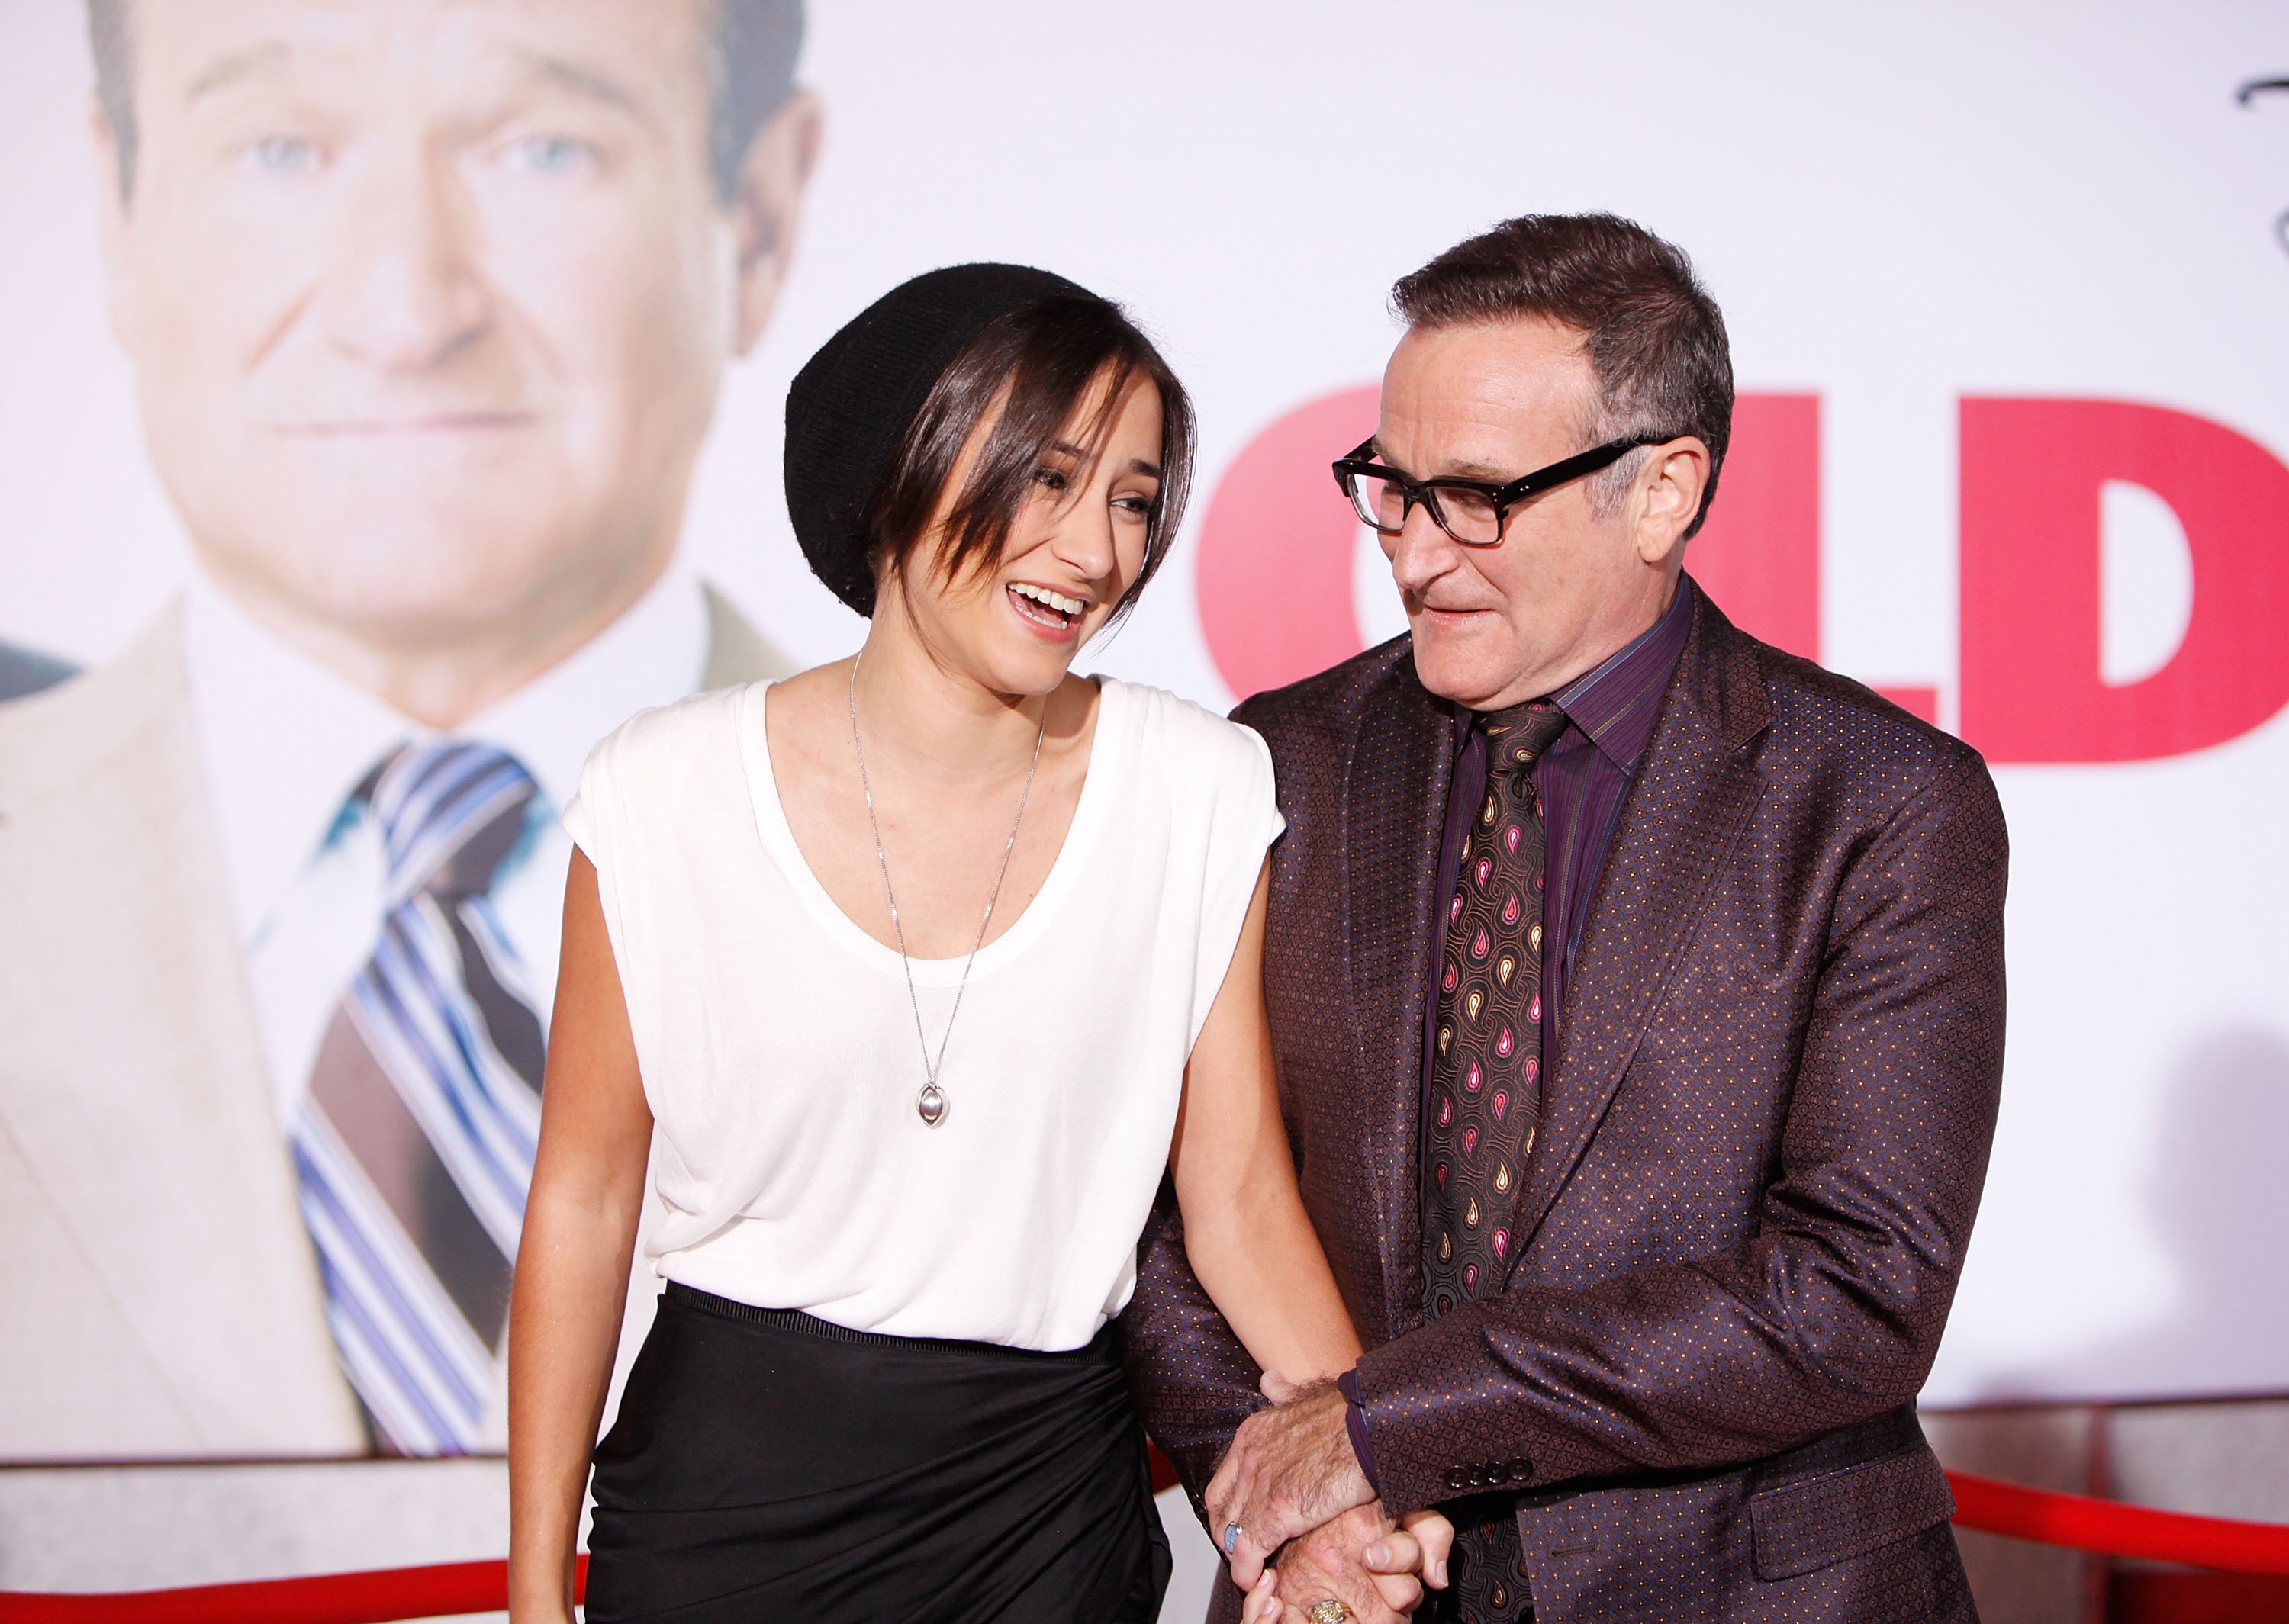 Zelda and Robin Williams at the Los Angeles premiere of "Old Dogs" on November 9, 2009, in Hollywood, California | Source: Getty Images